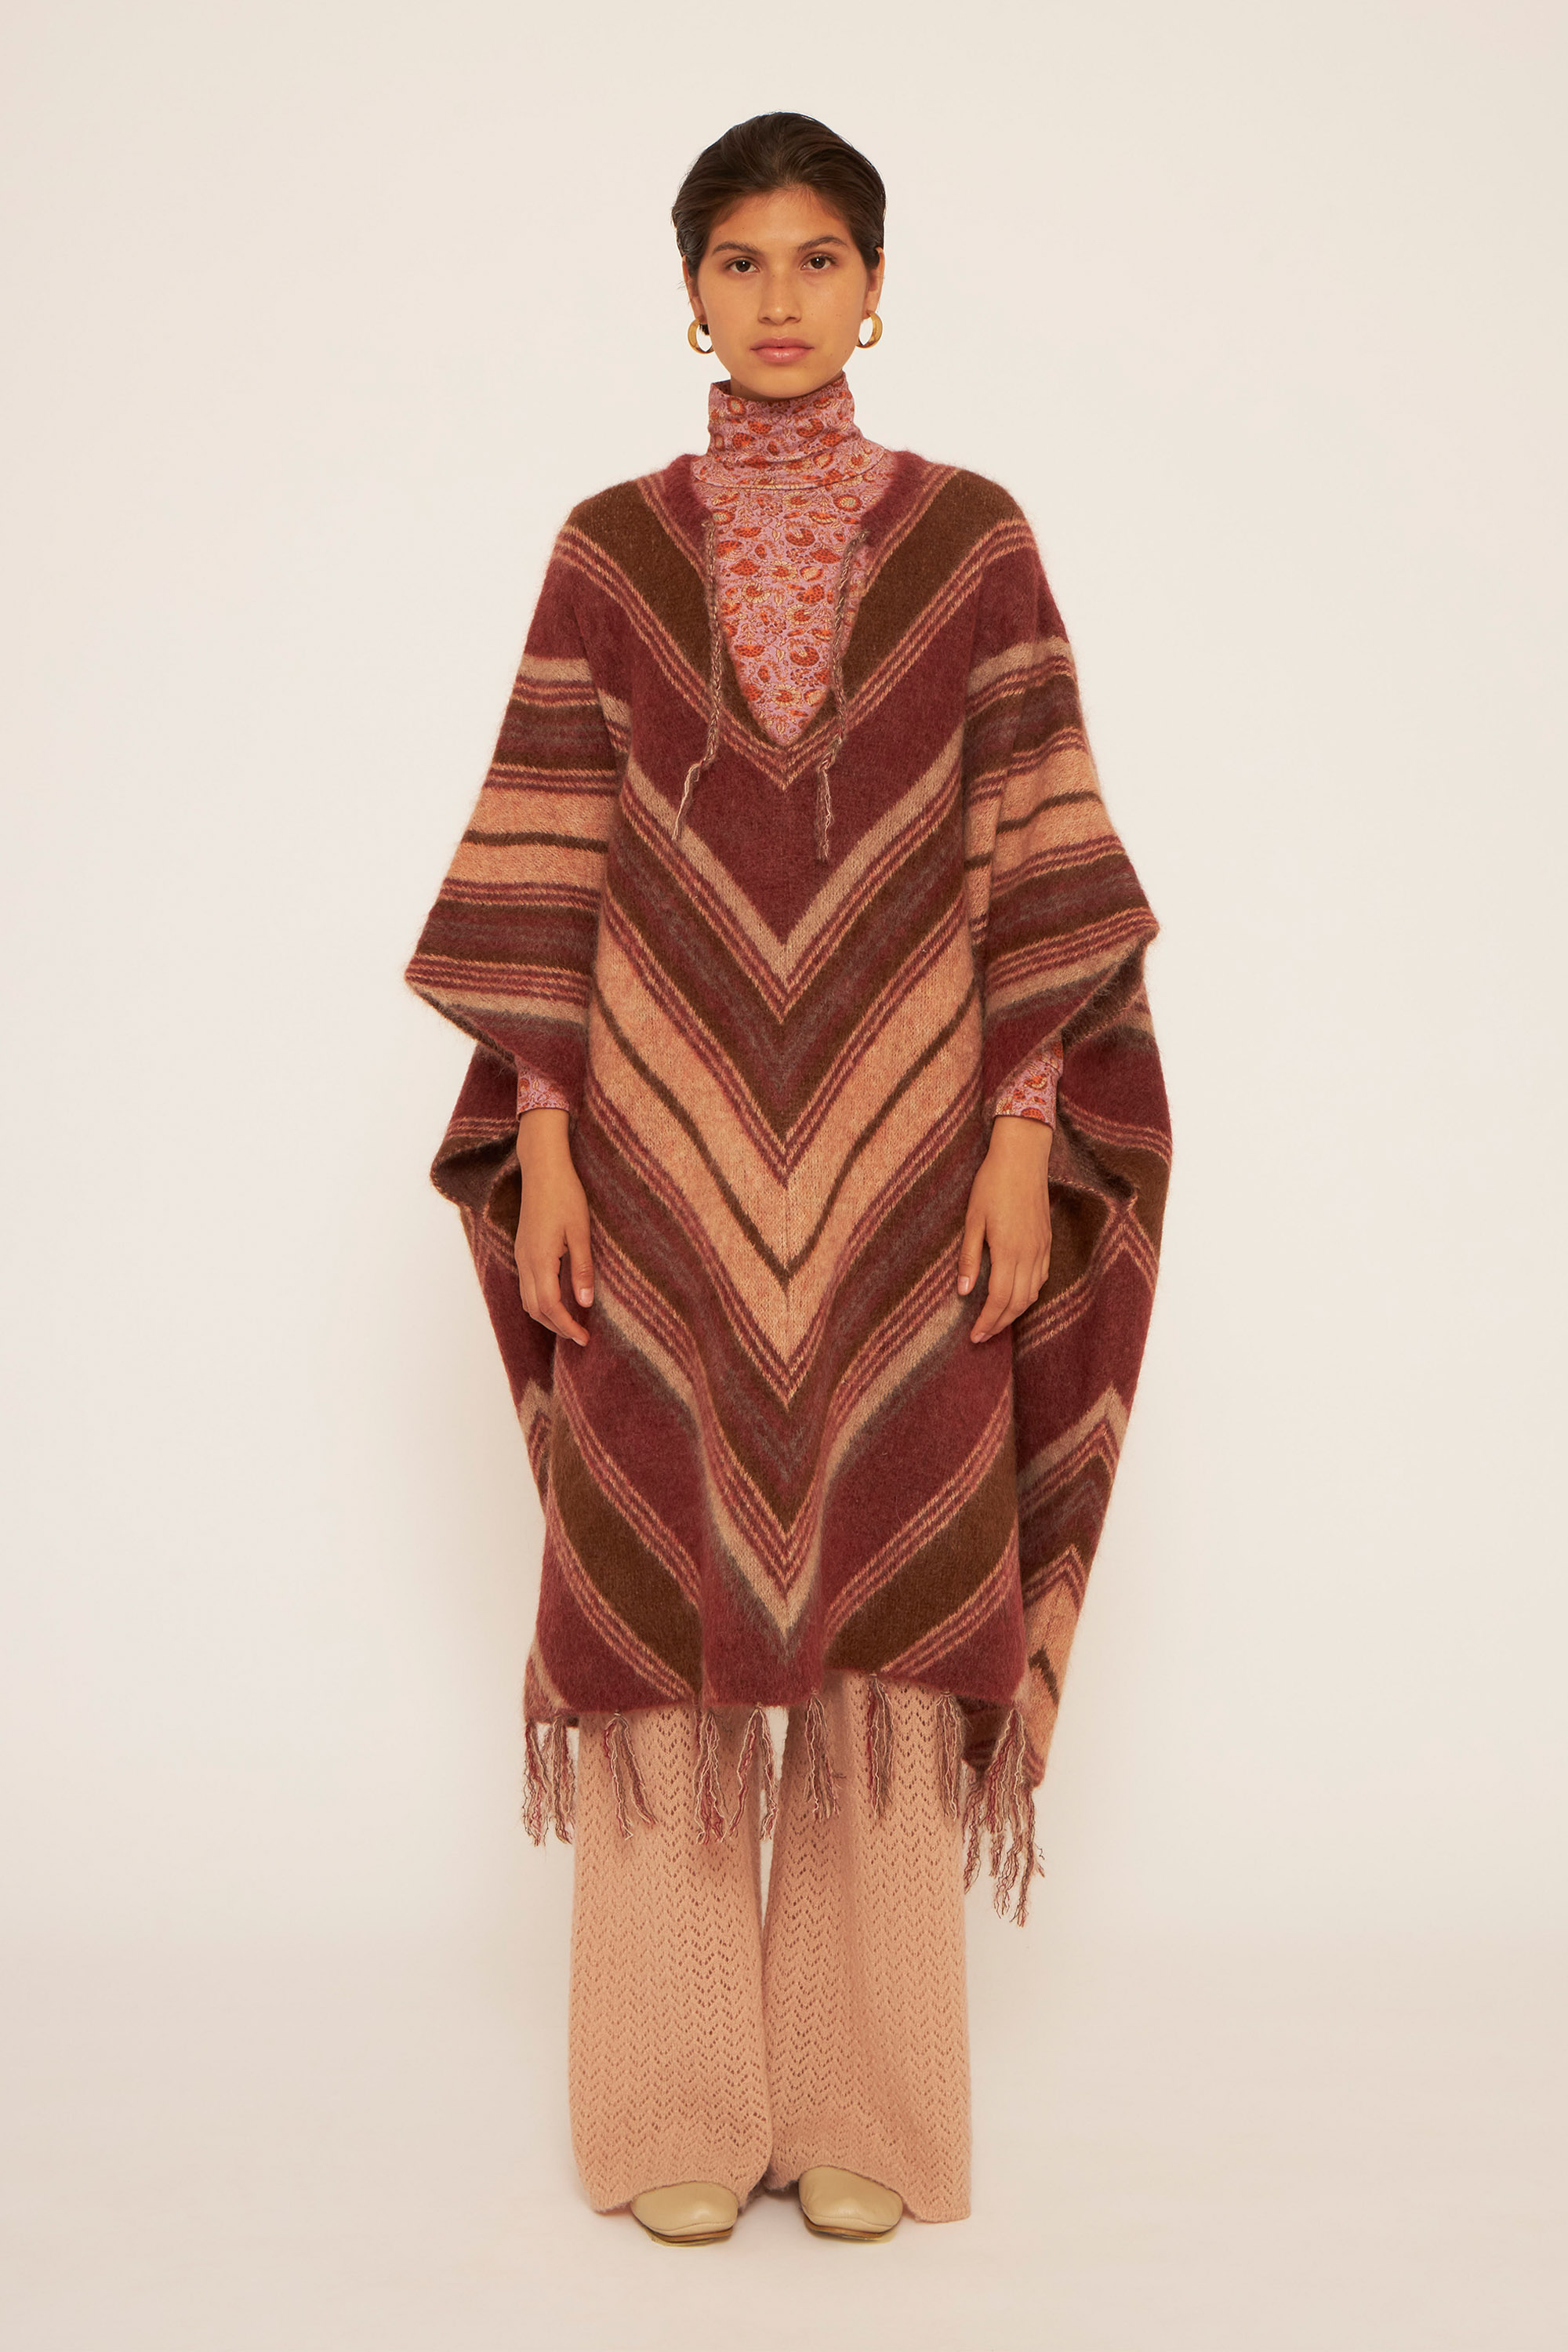 A girl wearing a long poncho in shade of burgundy, a craft light pink pants and a pink printed t-neck.